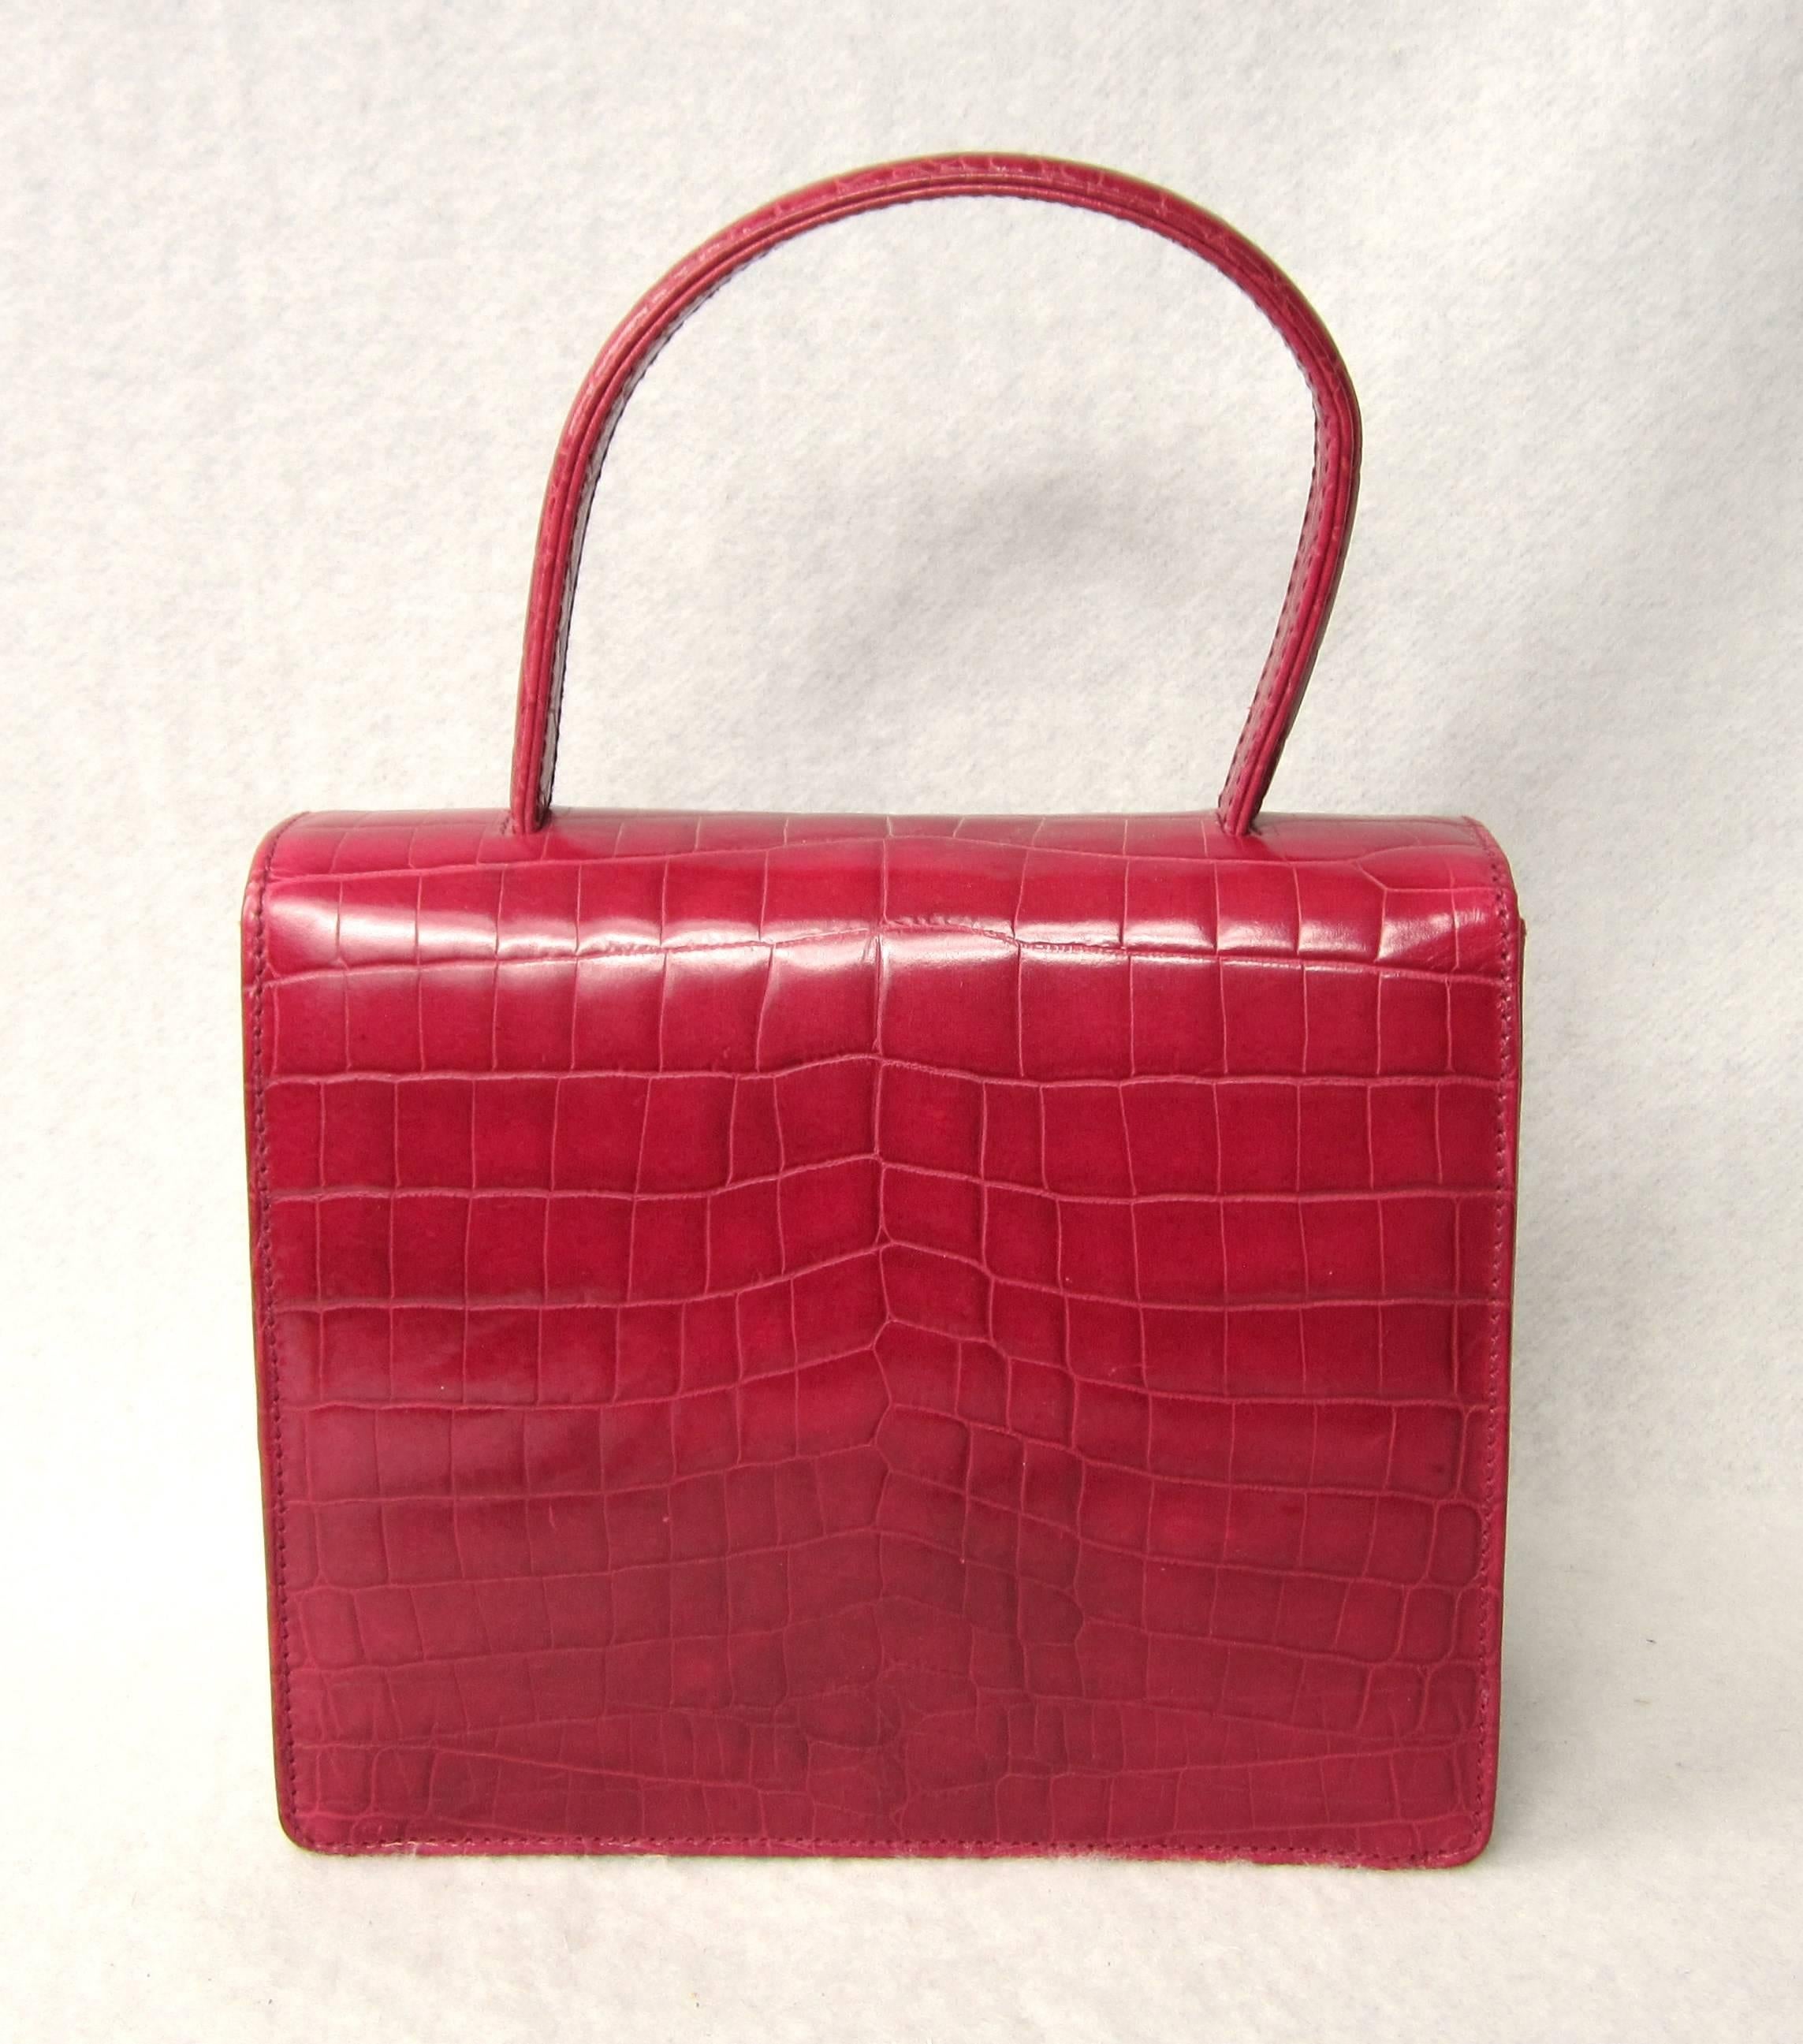 Stunning Dead stock Escada Made in Italy Leather Hand Bag with Silver tone hardware a Magnetic closure. Measuring 7.5 wide x 6.5 H x 2.75 deep 
One main compartment and a small compartment inside. This is out of a massive collection of Designer